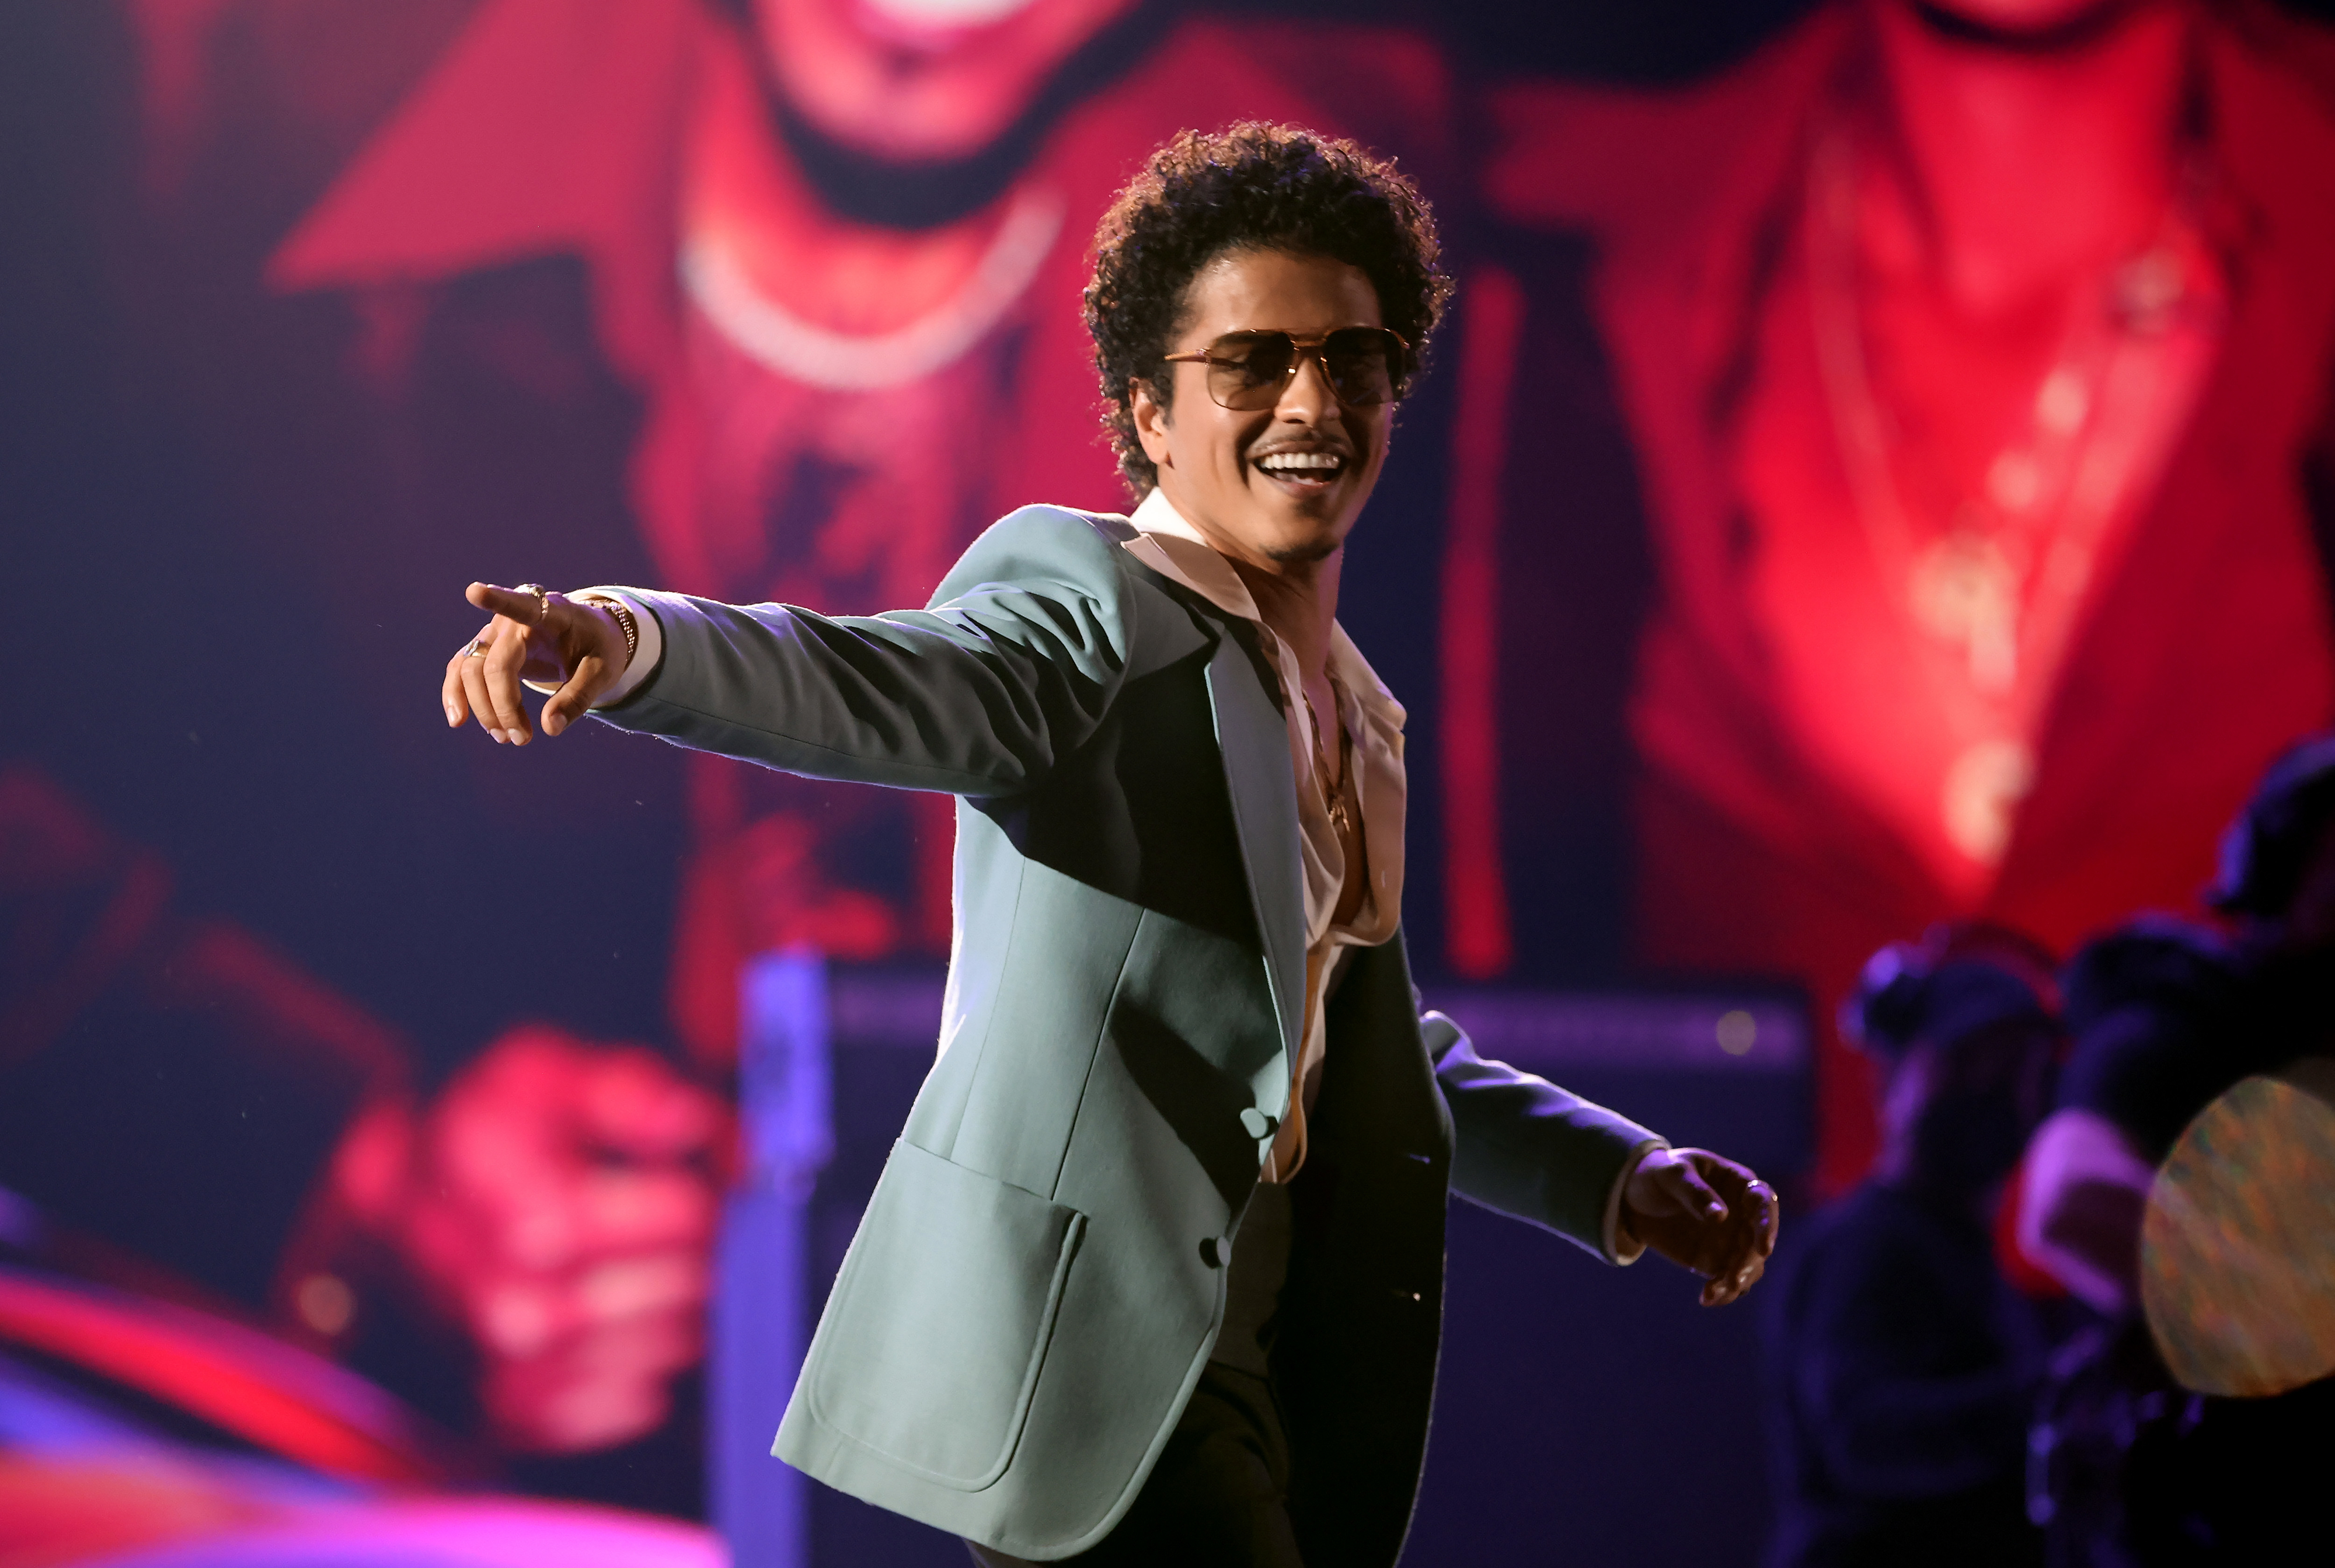 Bruno Mars performing on stage, wearing a stylish suit and sunglasses, gesturing to the audience